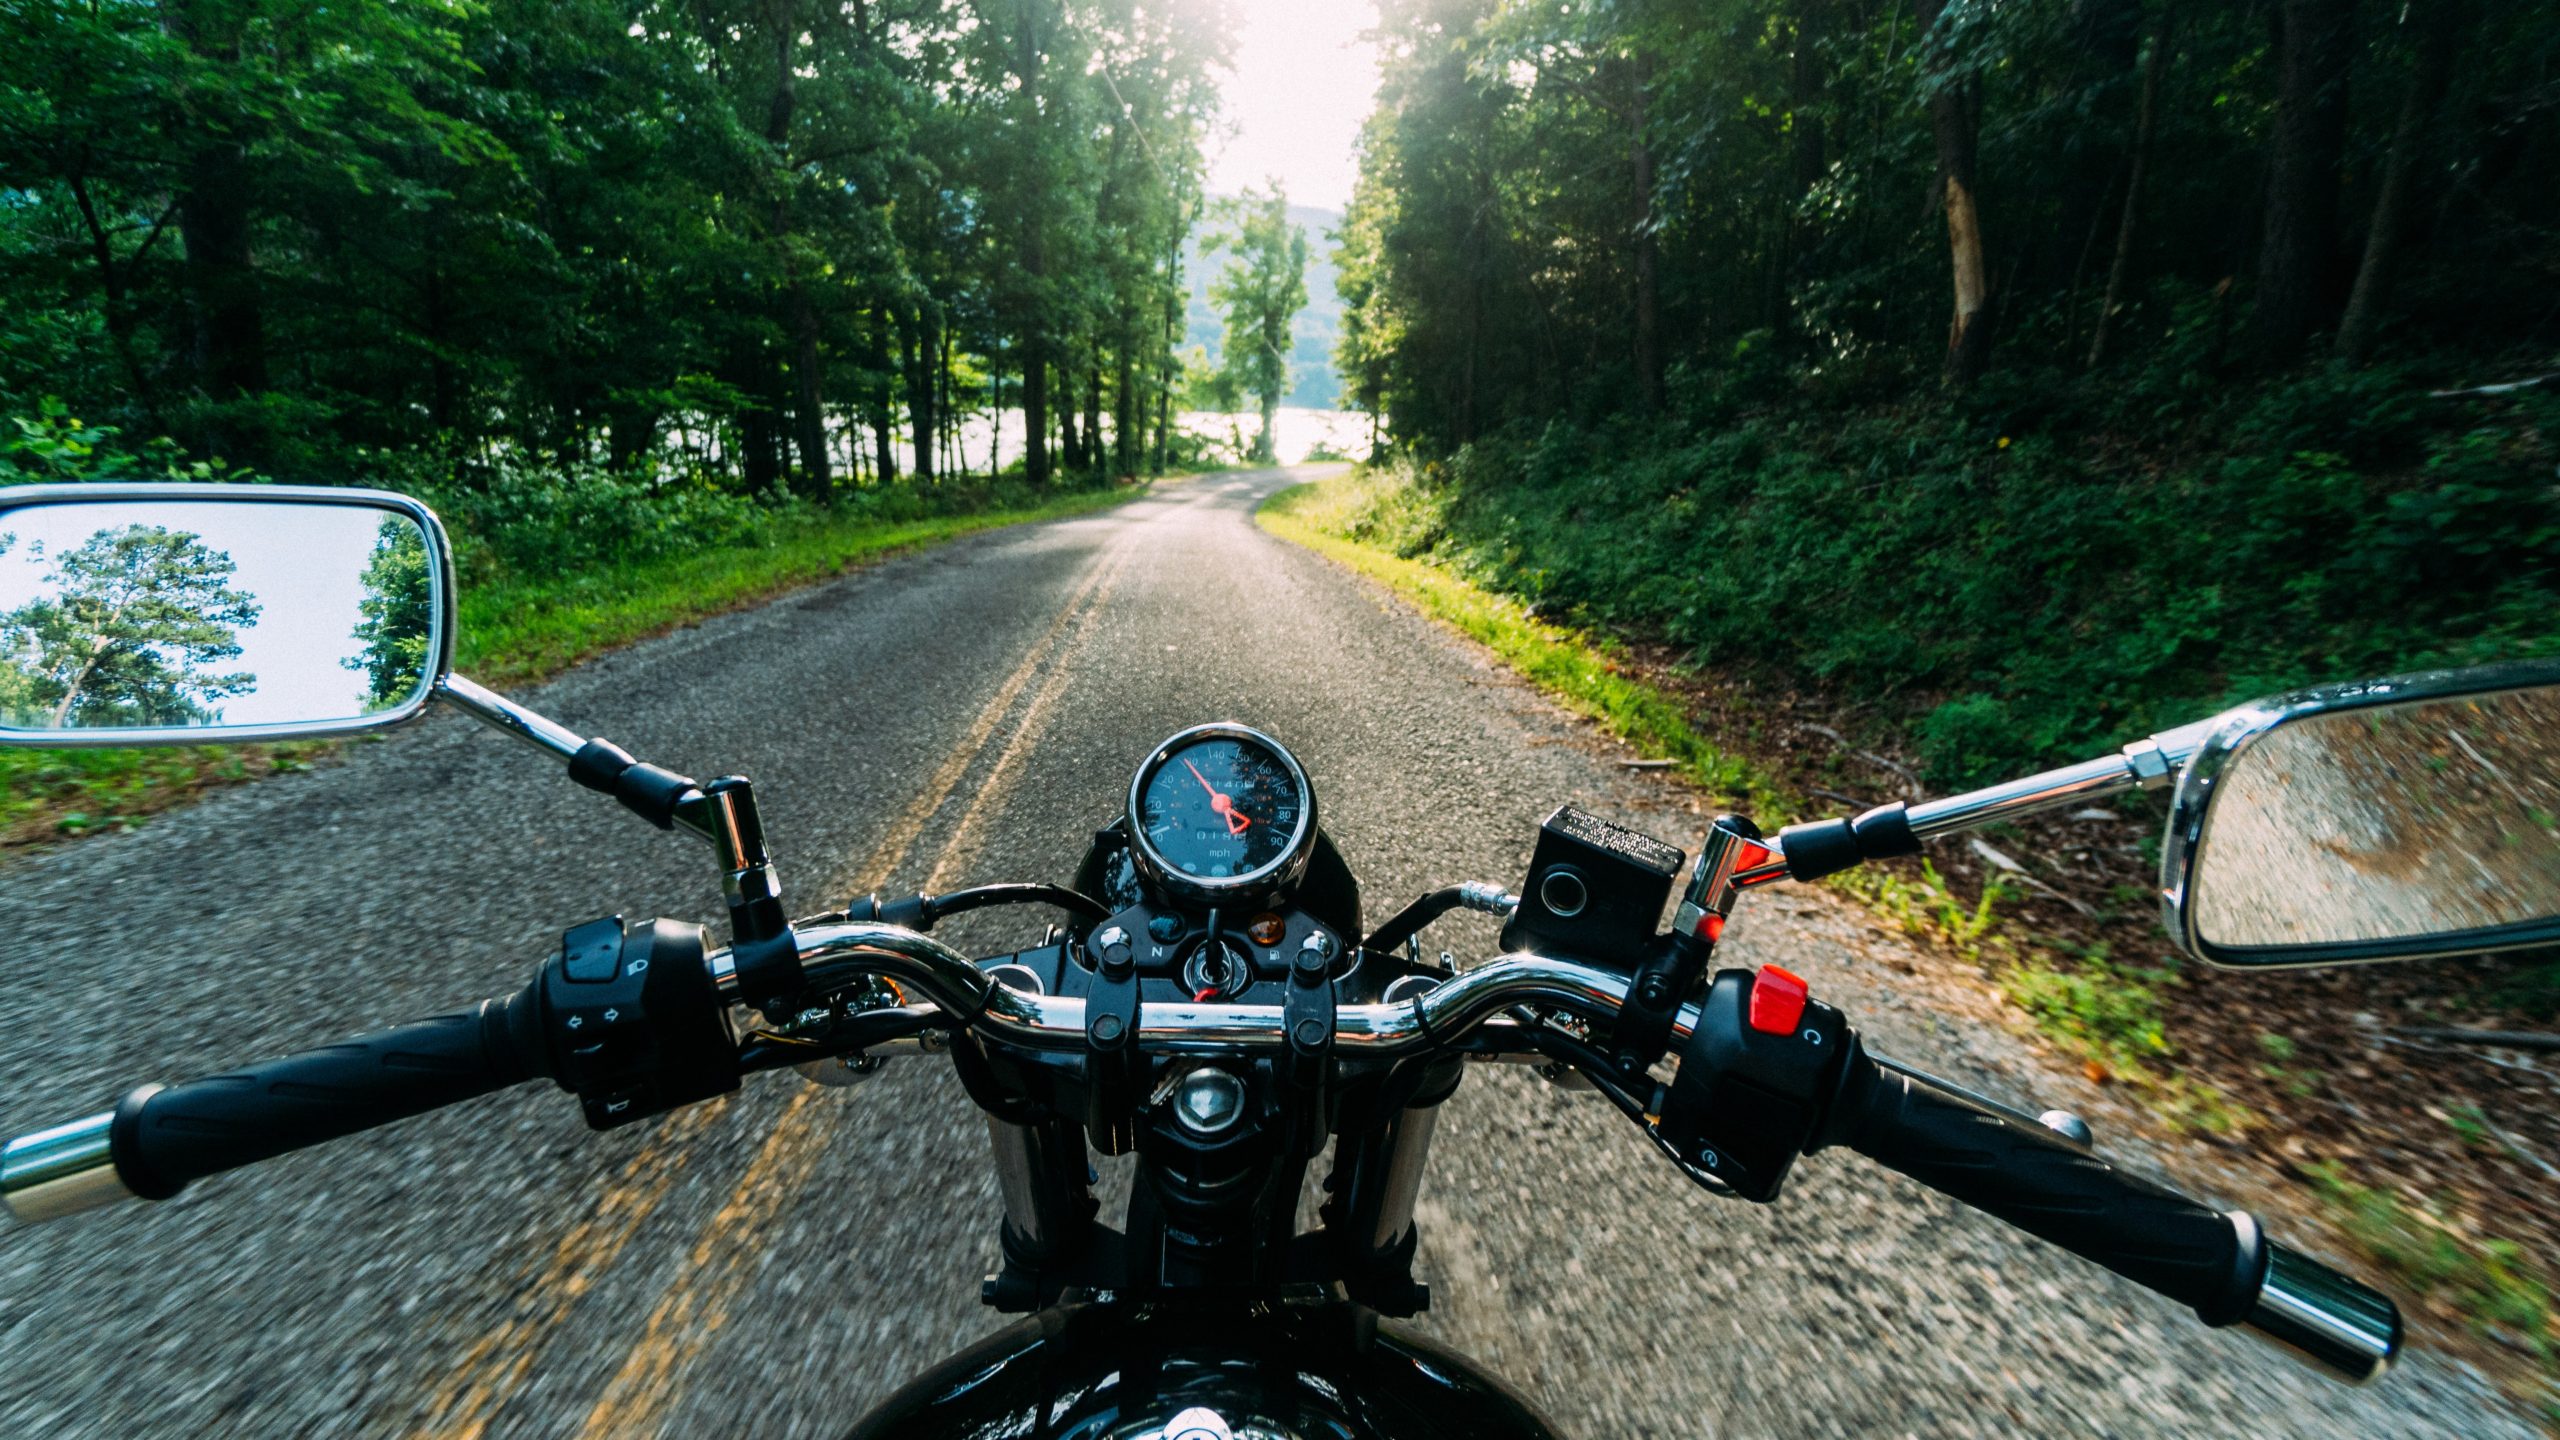 driver point of view on a motorcycle on road through woods